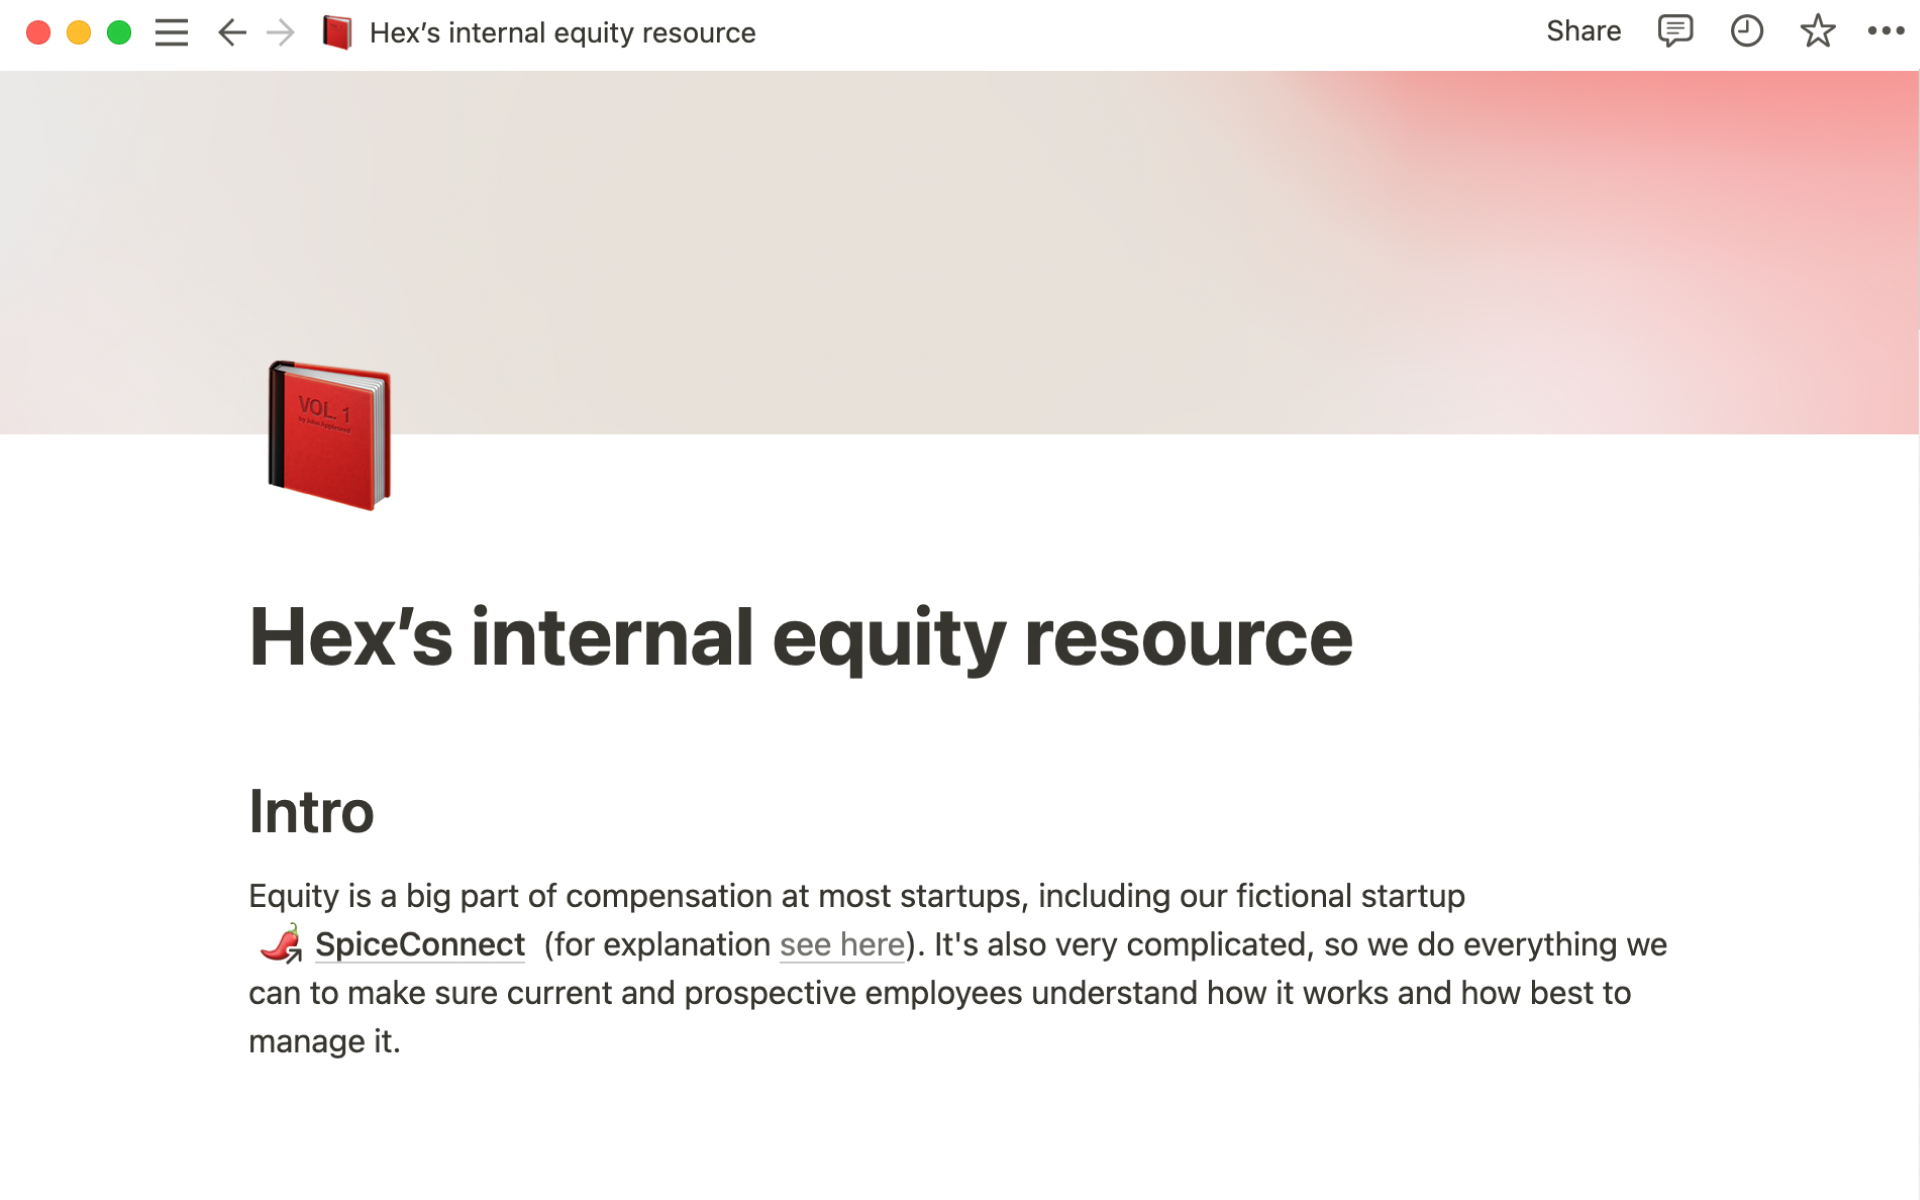 Help new employees understand equity by embedding a dynamic Hex app.